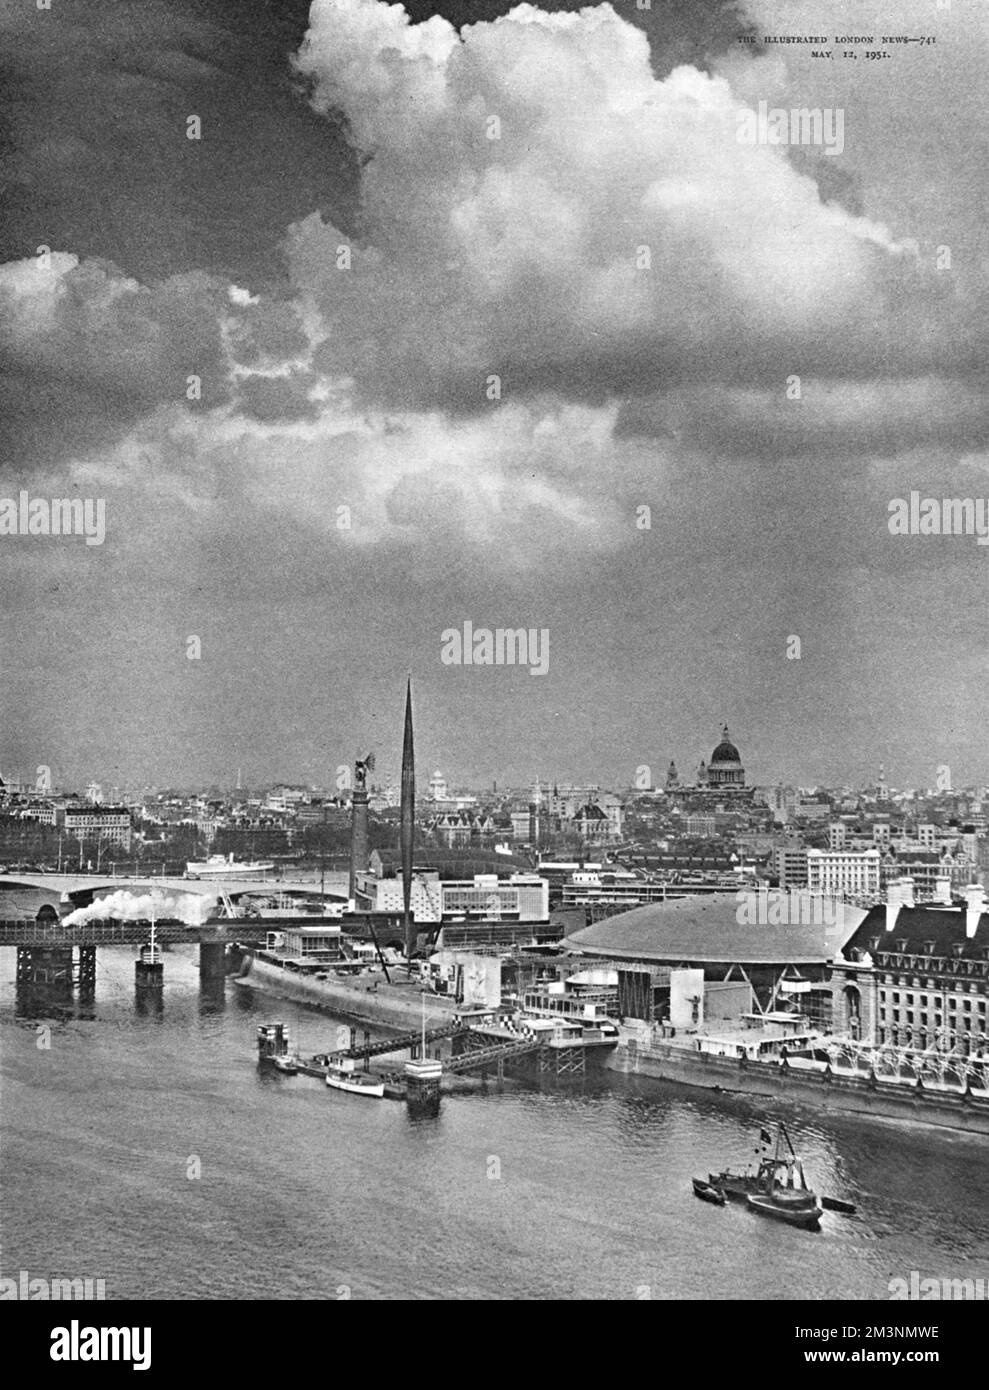 General view of the Festival of Britain site, South Bank, London, looking down the River Thames from Big Ben.  From the right can be seen County Hall, the Dome of Discovery, the Sea and Ships Pavilion facing the Nelson Pier, the Charoux bas relief sculpture 'The Islanders', the Skylon, and the Festival Hall and old Shot Tower just beyond Hungerford Bridge.  In the distance can be seen St Paul's Cathedral, where the service of dedication was held.     Date: early 1951 Stock Photo